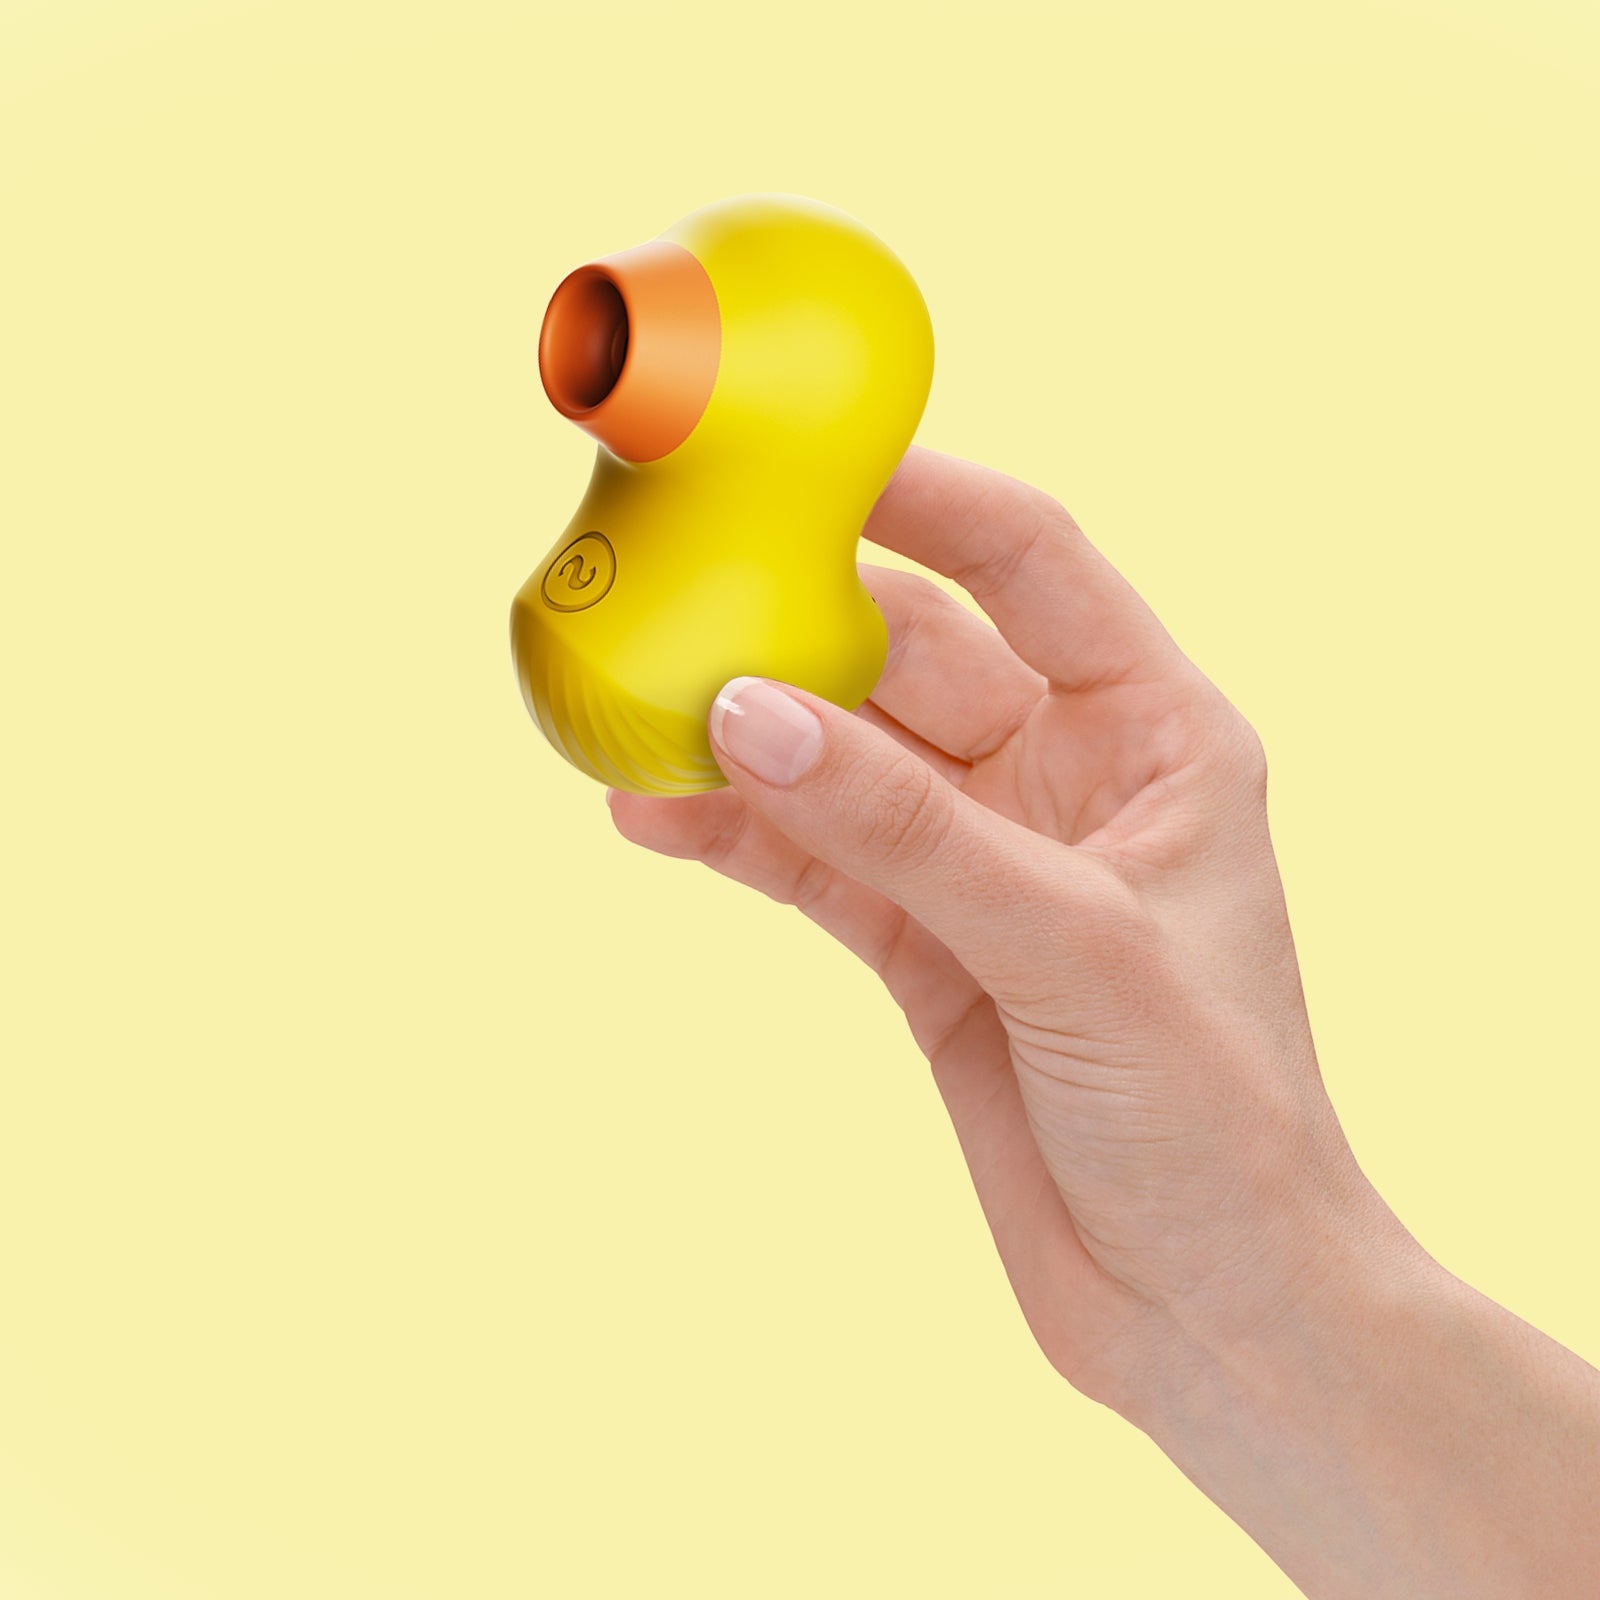 Mr. Duckie Sucking Vibrator, 3 in 1 sucking vibrator, 7 different suction modes, 100% waterproof vibrator, body-safe medical grade silicone, Build With Pleasure Air technology, Portable size and easy to clean